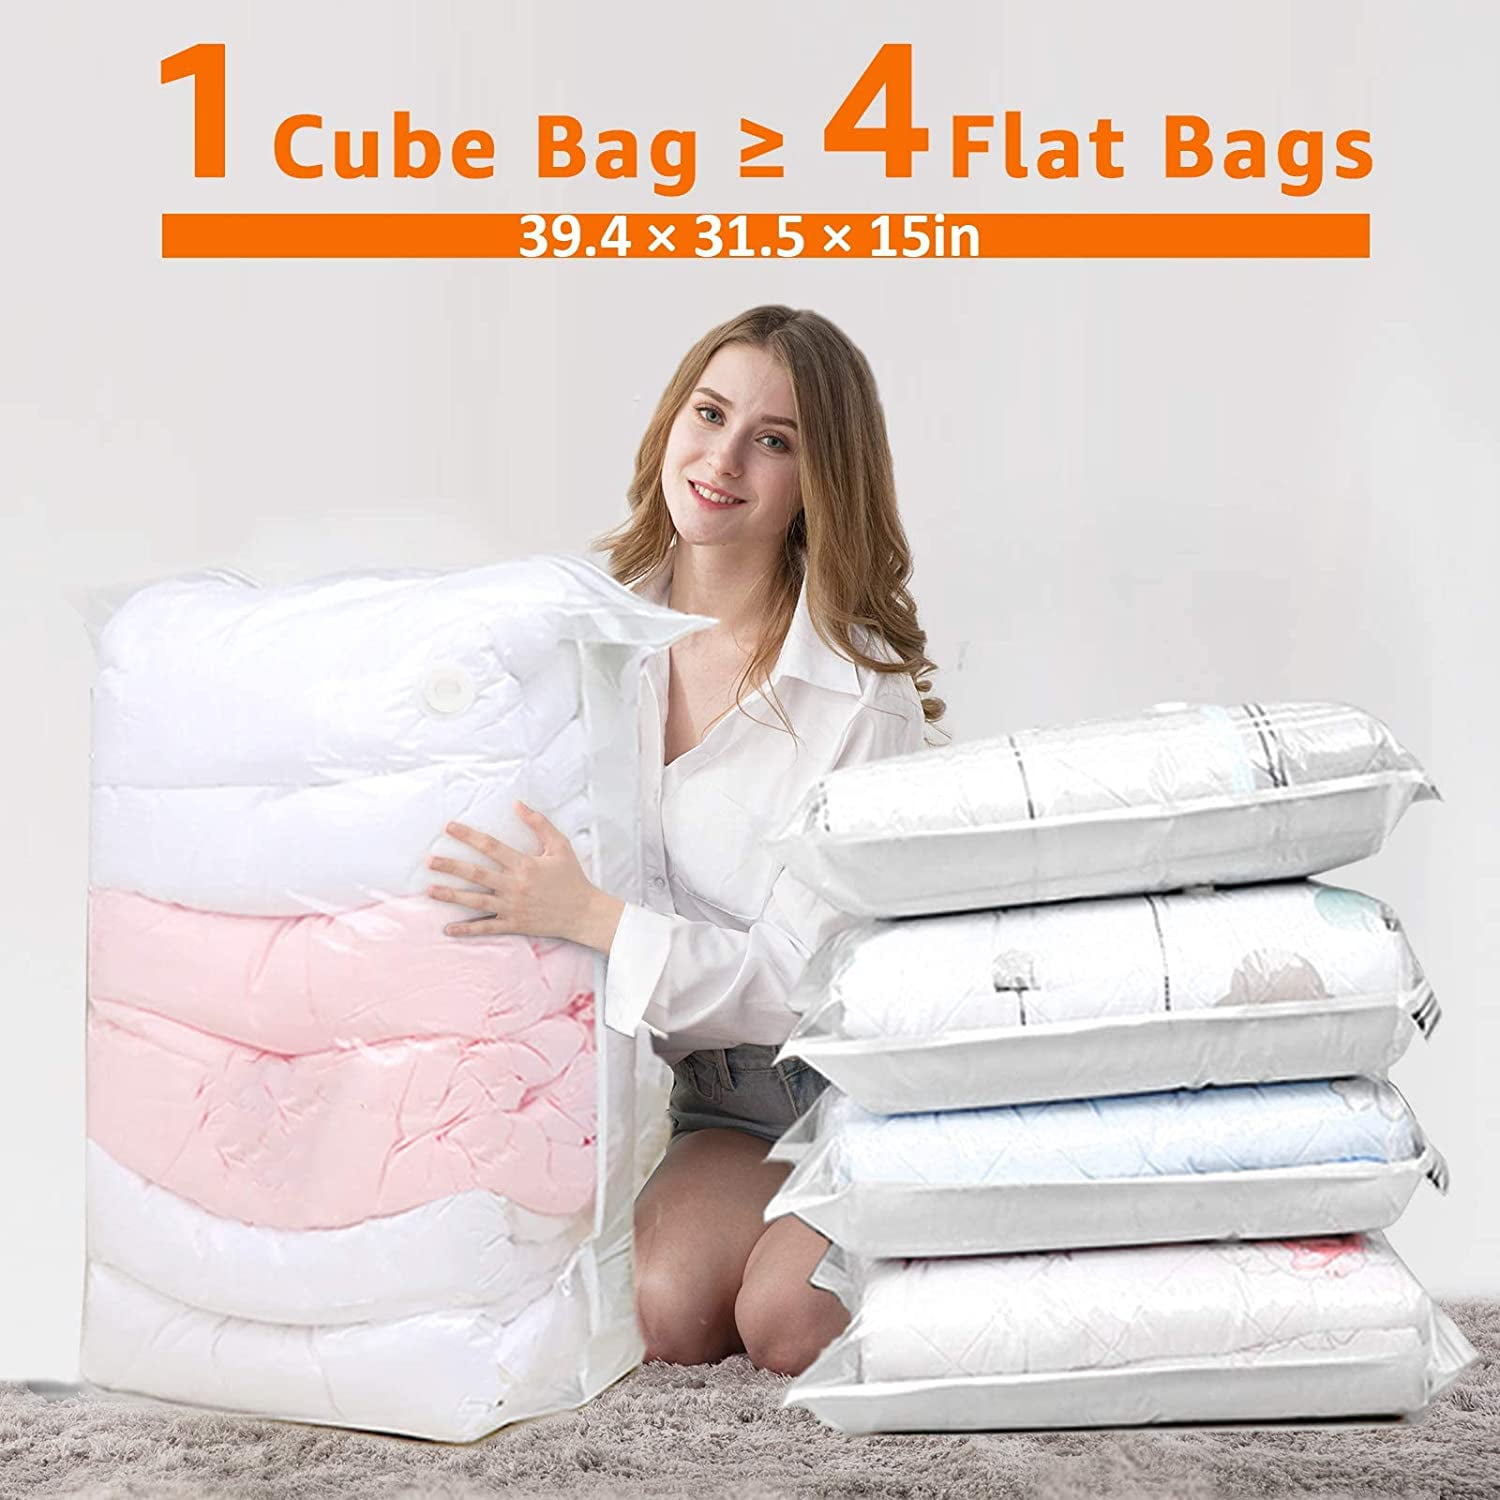  CLEVHOM Cube Vacuum Storage Bags for Comforters and Blankets 6  Pack, Vacuum Seal Bags for Beddings, Jumbo Space Saver Bags for Clothes (3  Medium, 3 Large) : Home & Kitchen